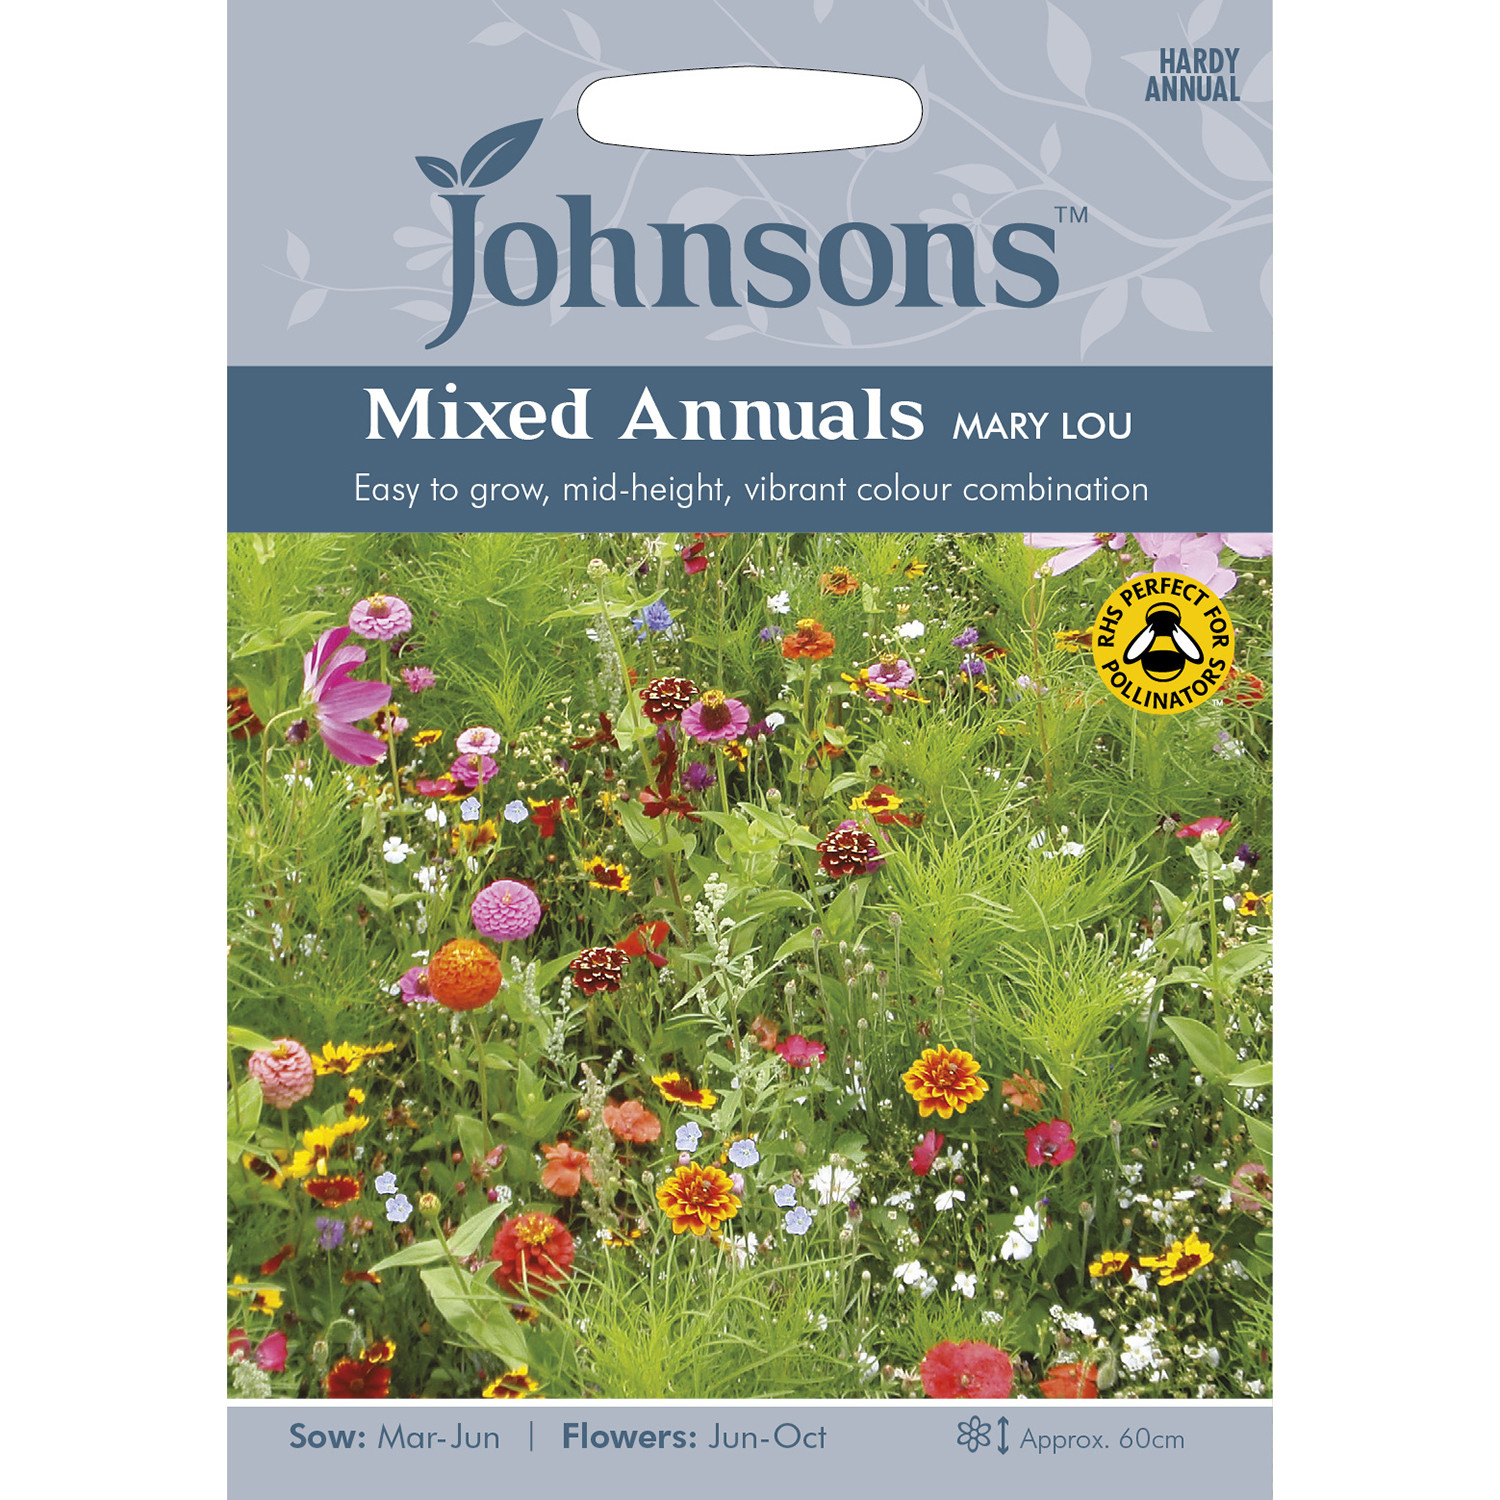 Johnsons Mary Lou Mixed Annuals Flower Seeds Image 2